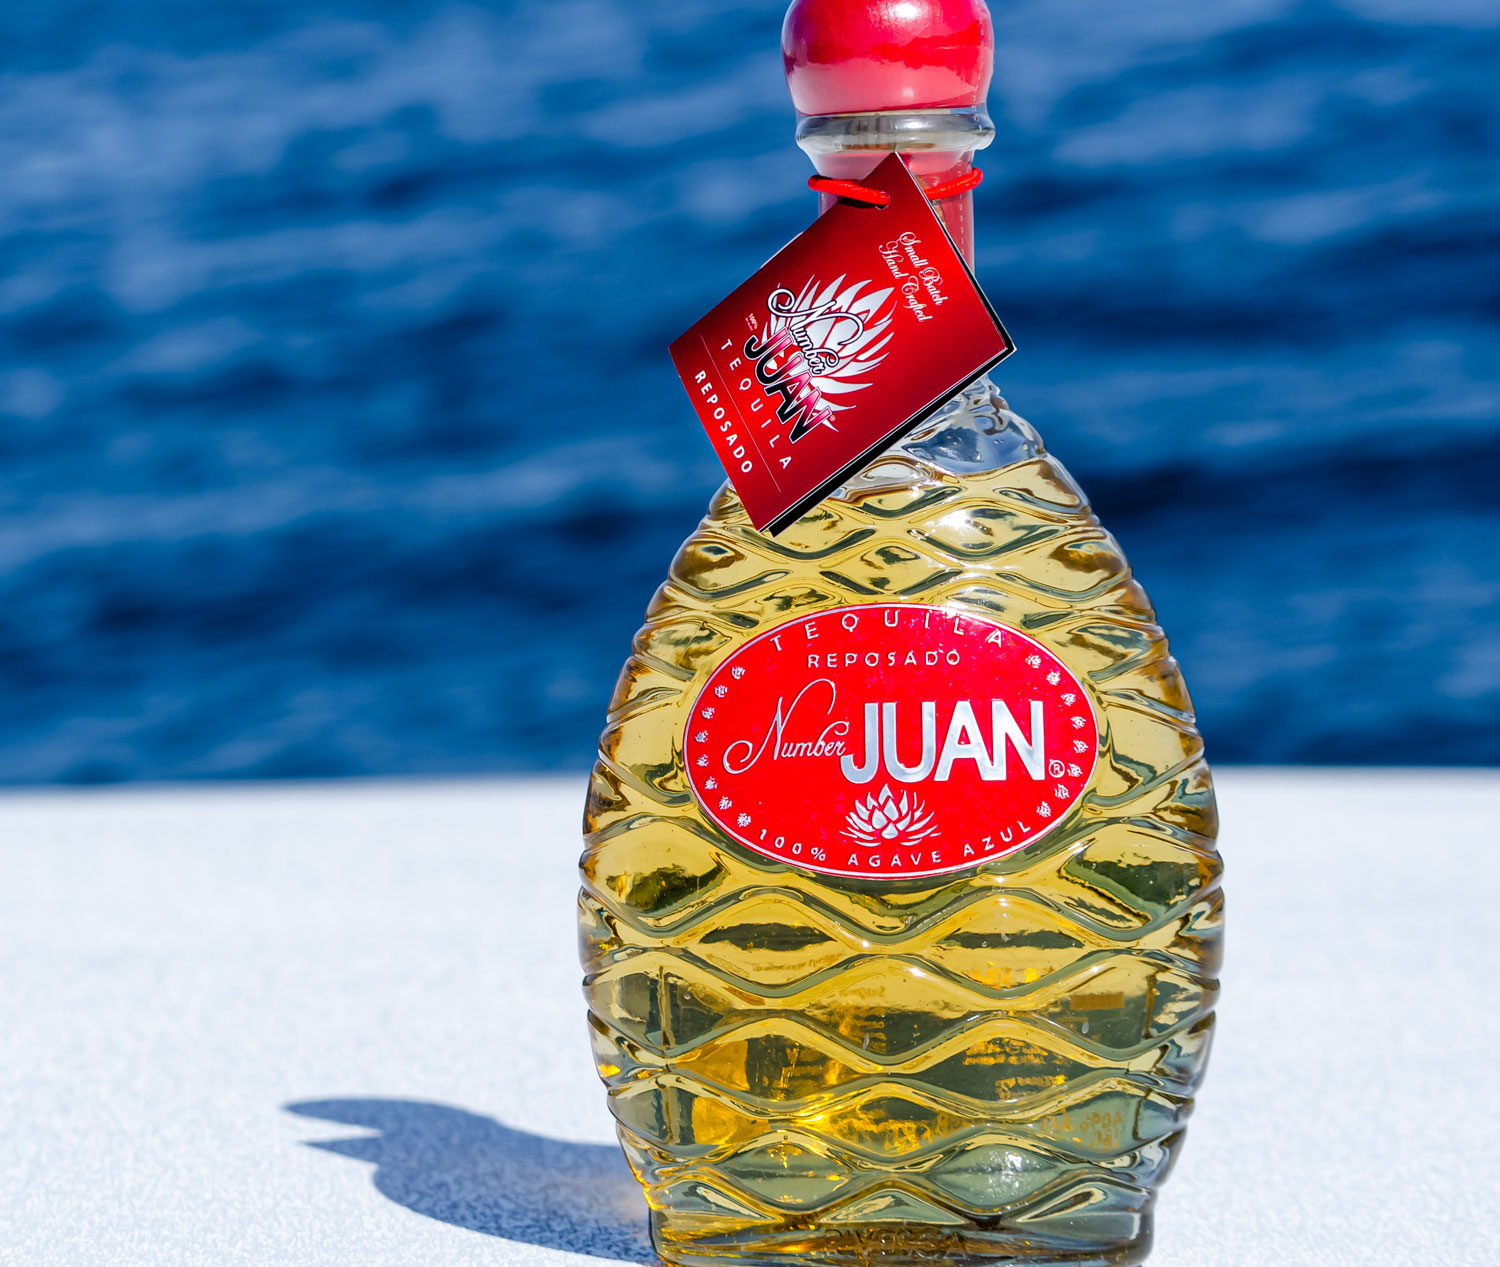 numberjuantequila beginners guide to tequila what is tequila reposado